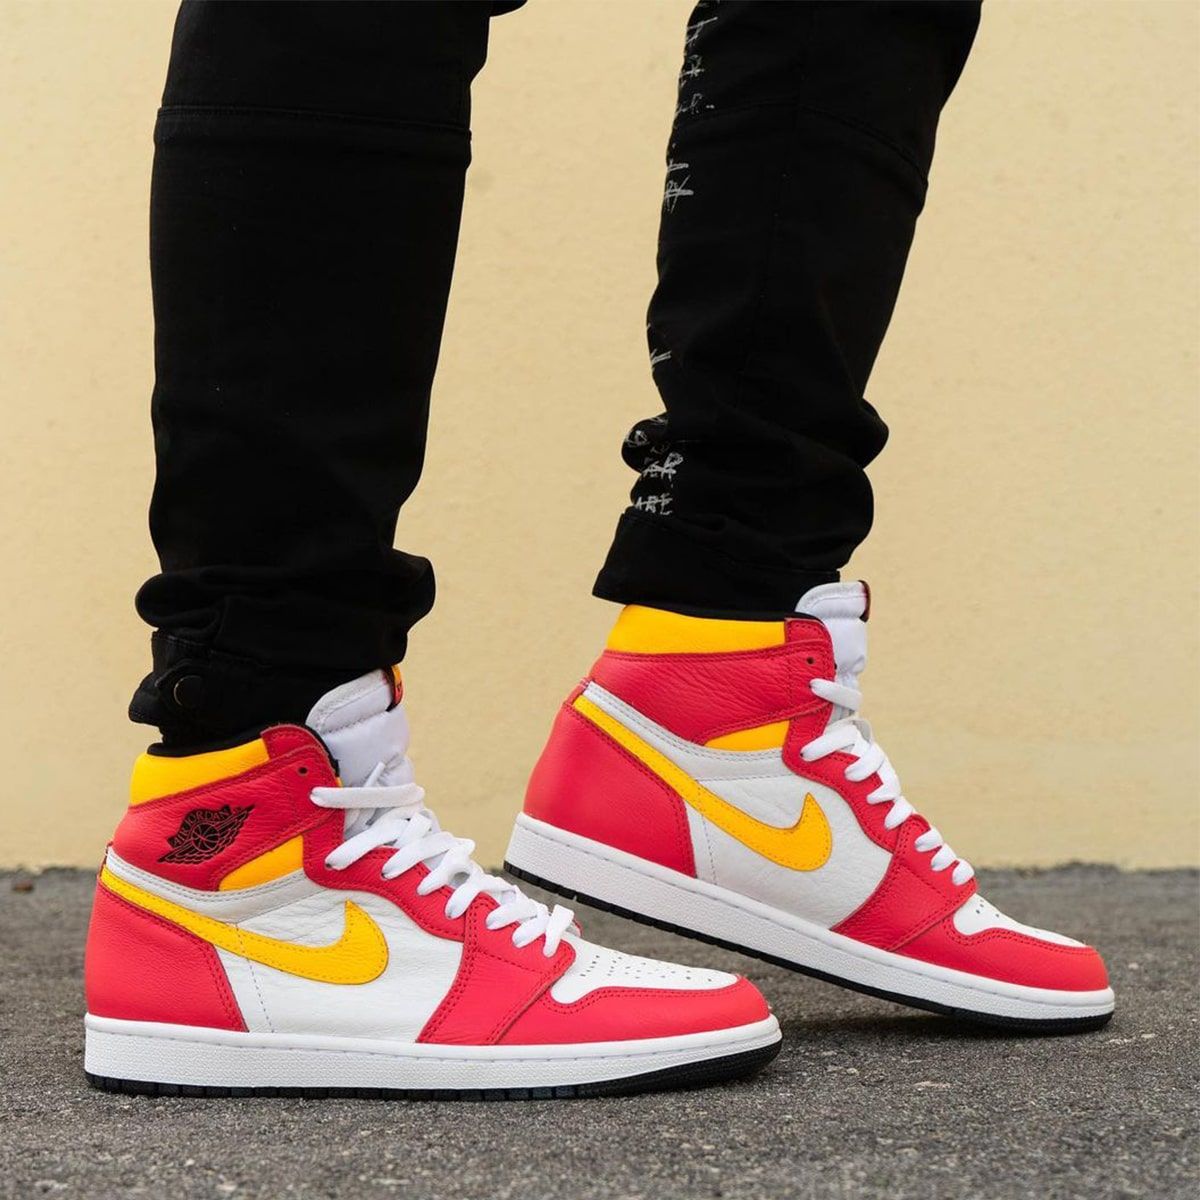 Where to Buy the Air Jordan 1 High “Light Fusion Red